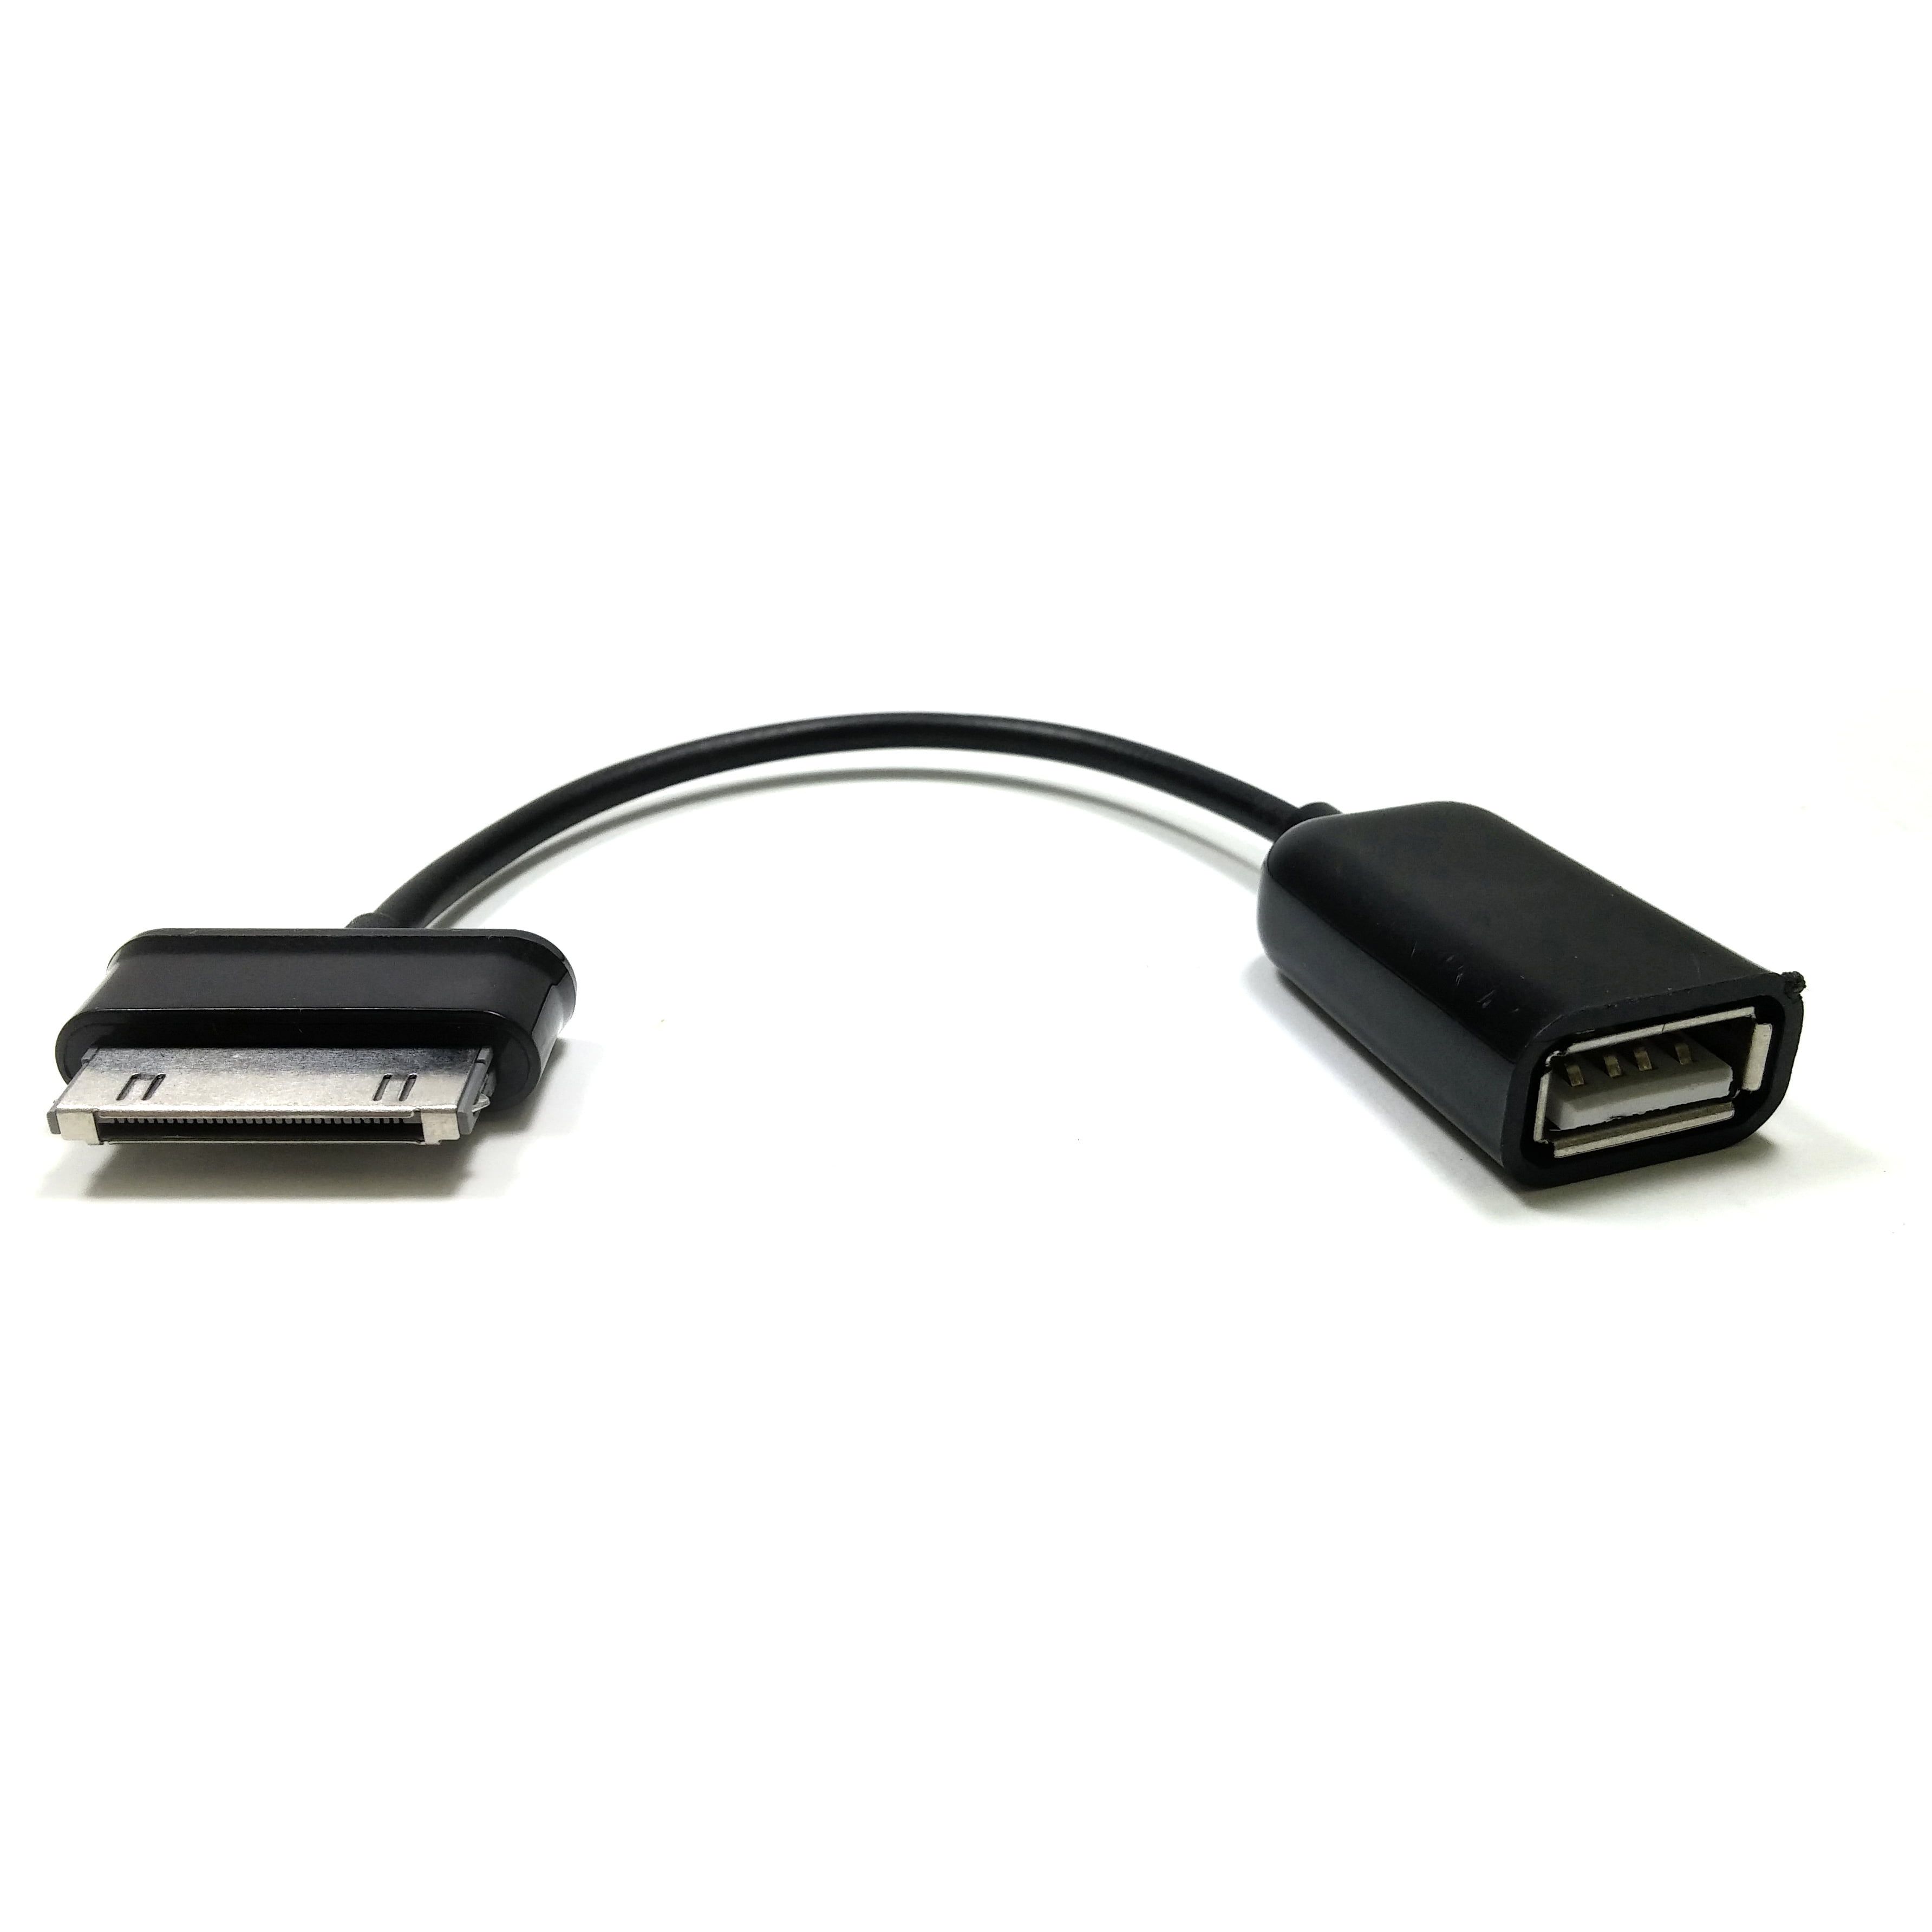 Micro USB Host to Female USB OTG Cable Adapter For Samsung Galaxy Tab 3 10.1 